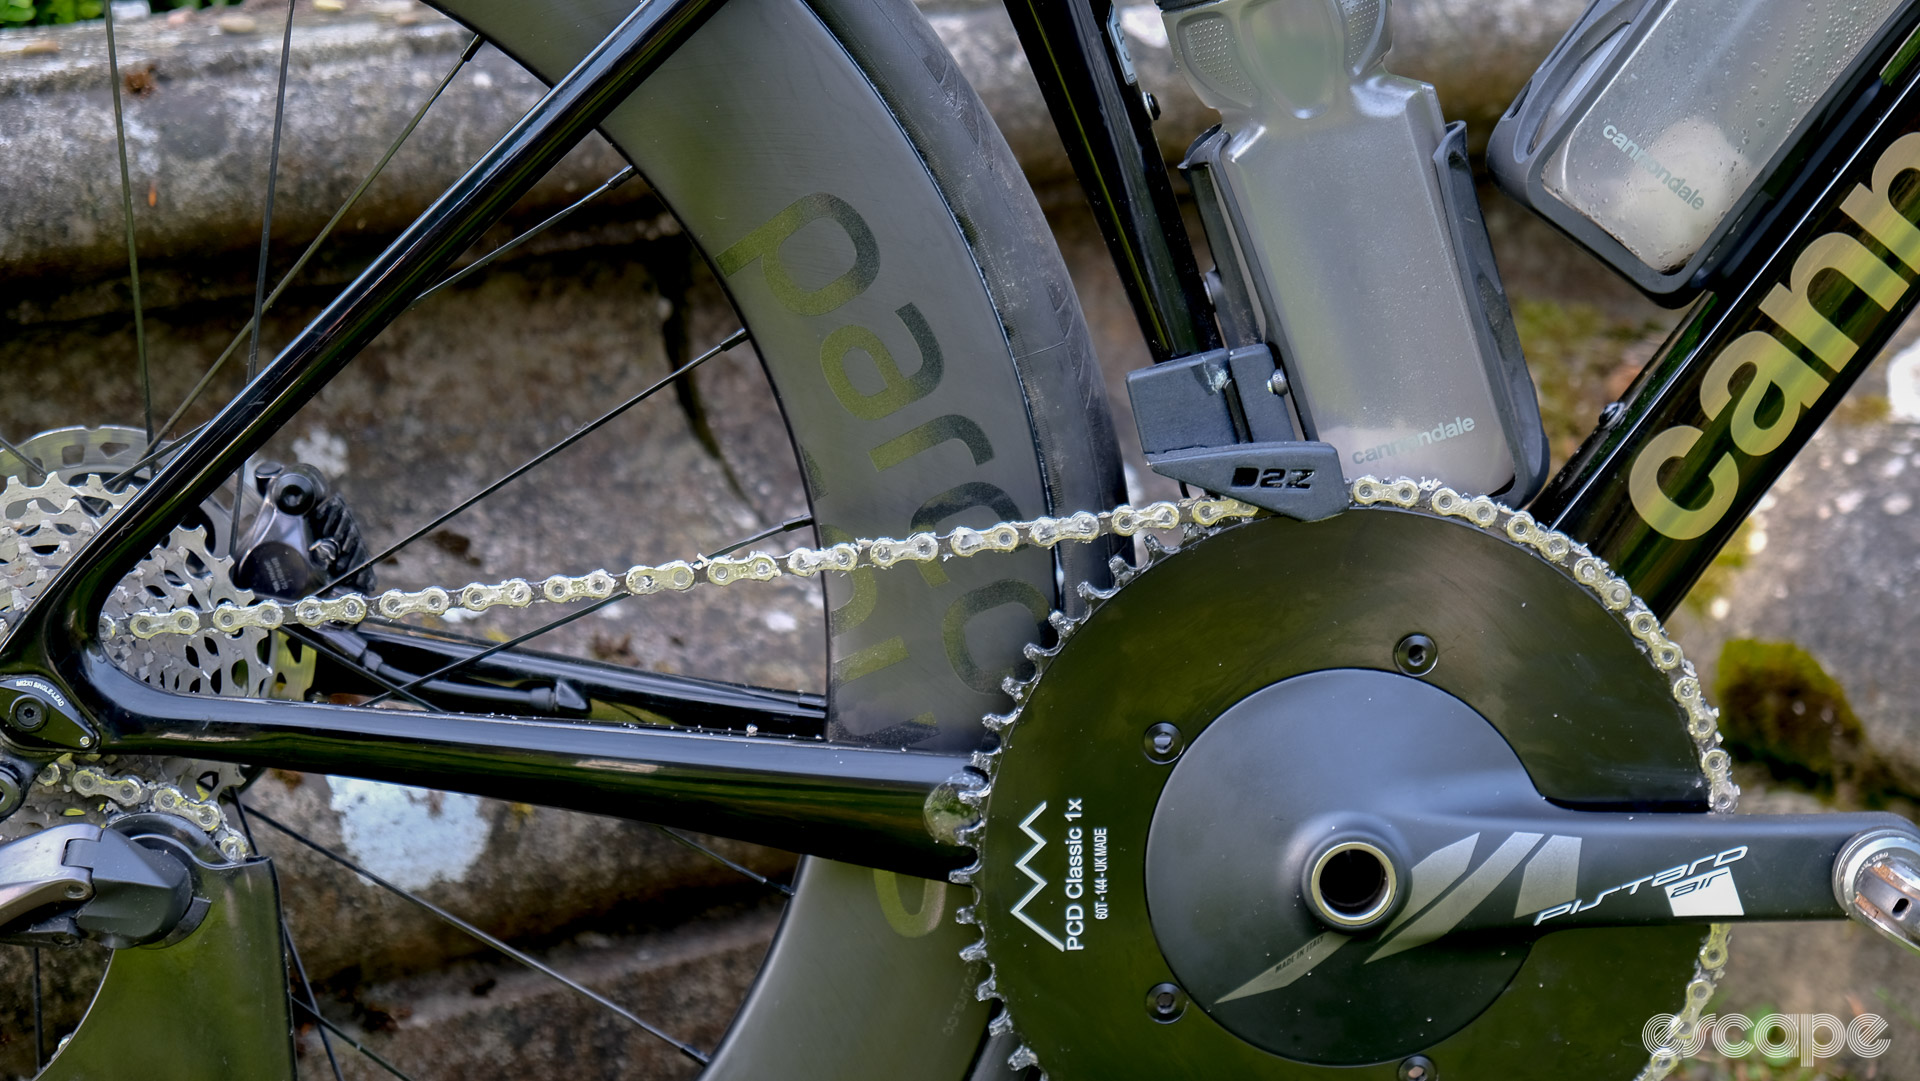 The drivetrain, showing the Drag2Zero chain catcher running along the top of the chainring.